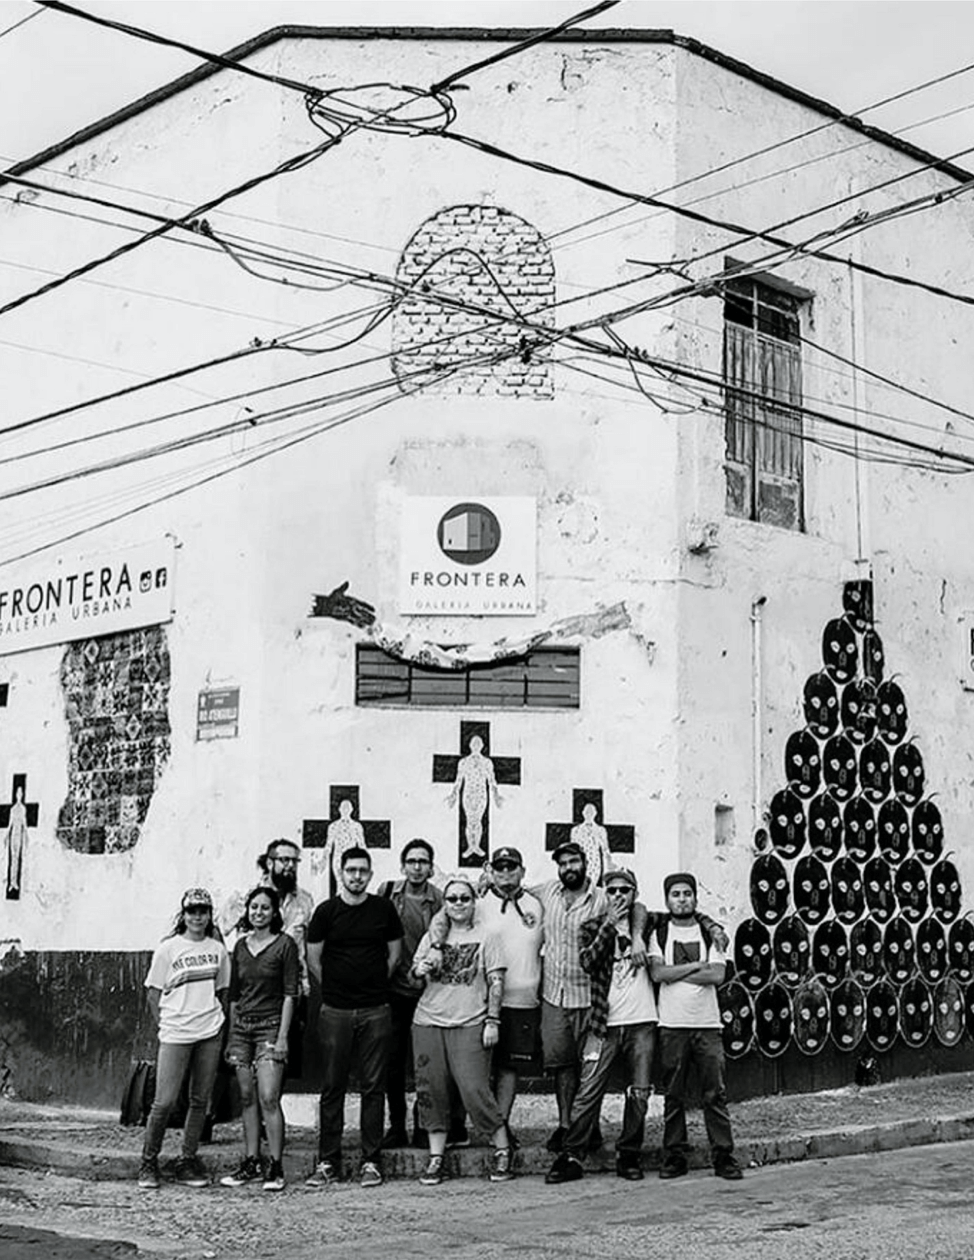 Jacoub Reyes and a community of artists in Guadalajara, Mexico